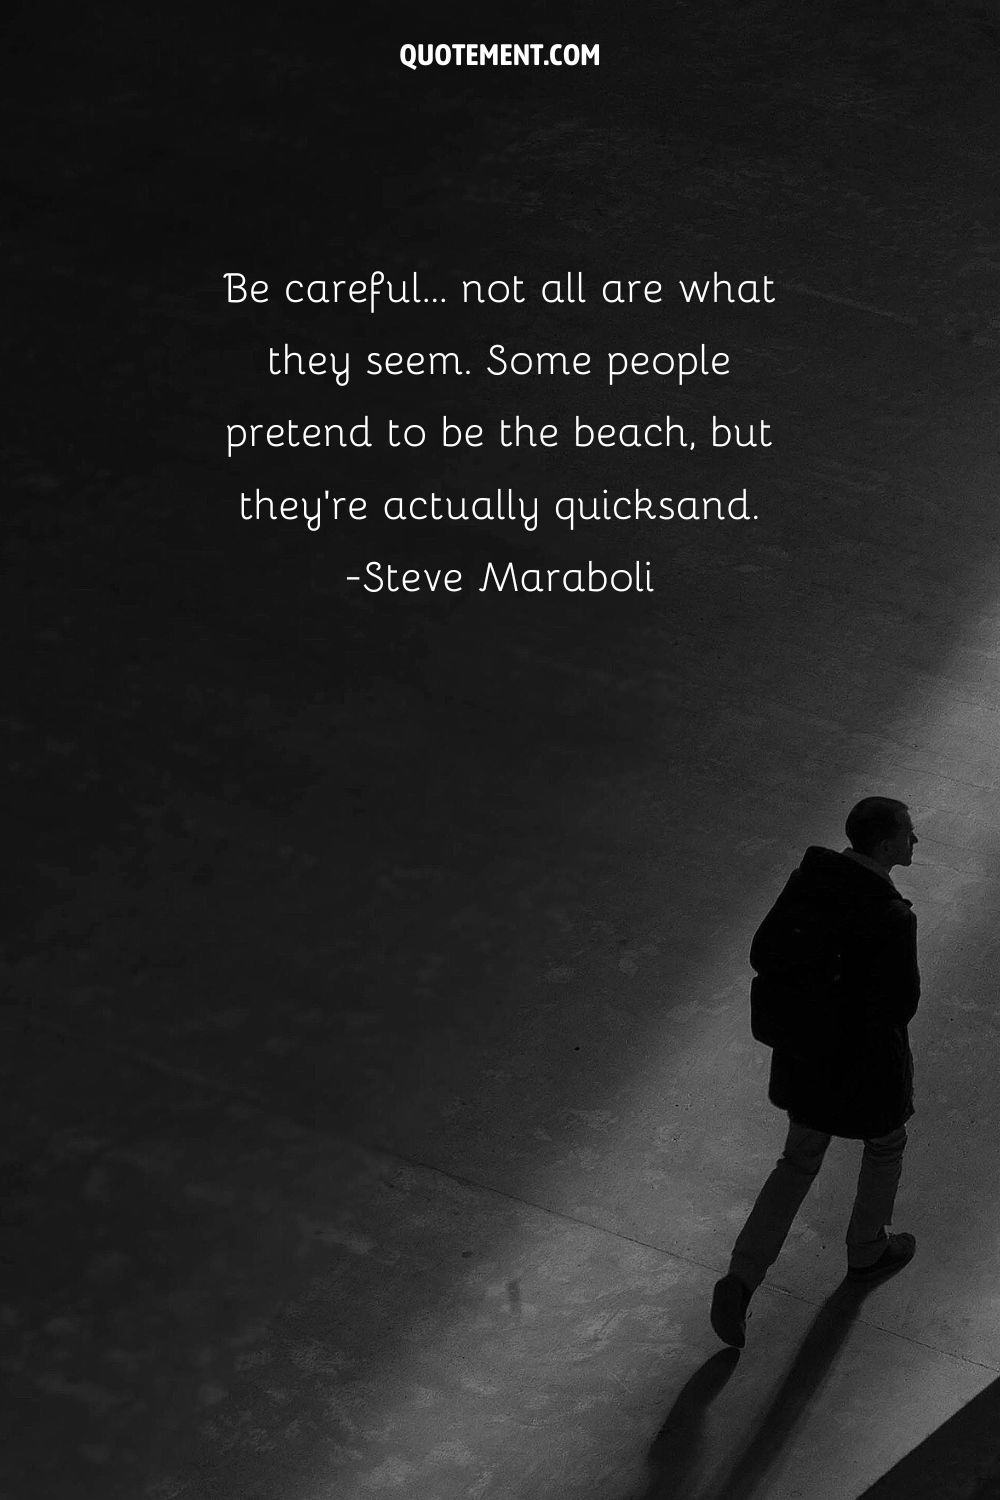 Be careful… not all are what they seem. Some people pretend to be the beach, but they’re actually quicksand.